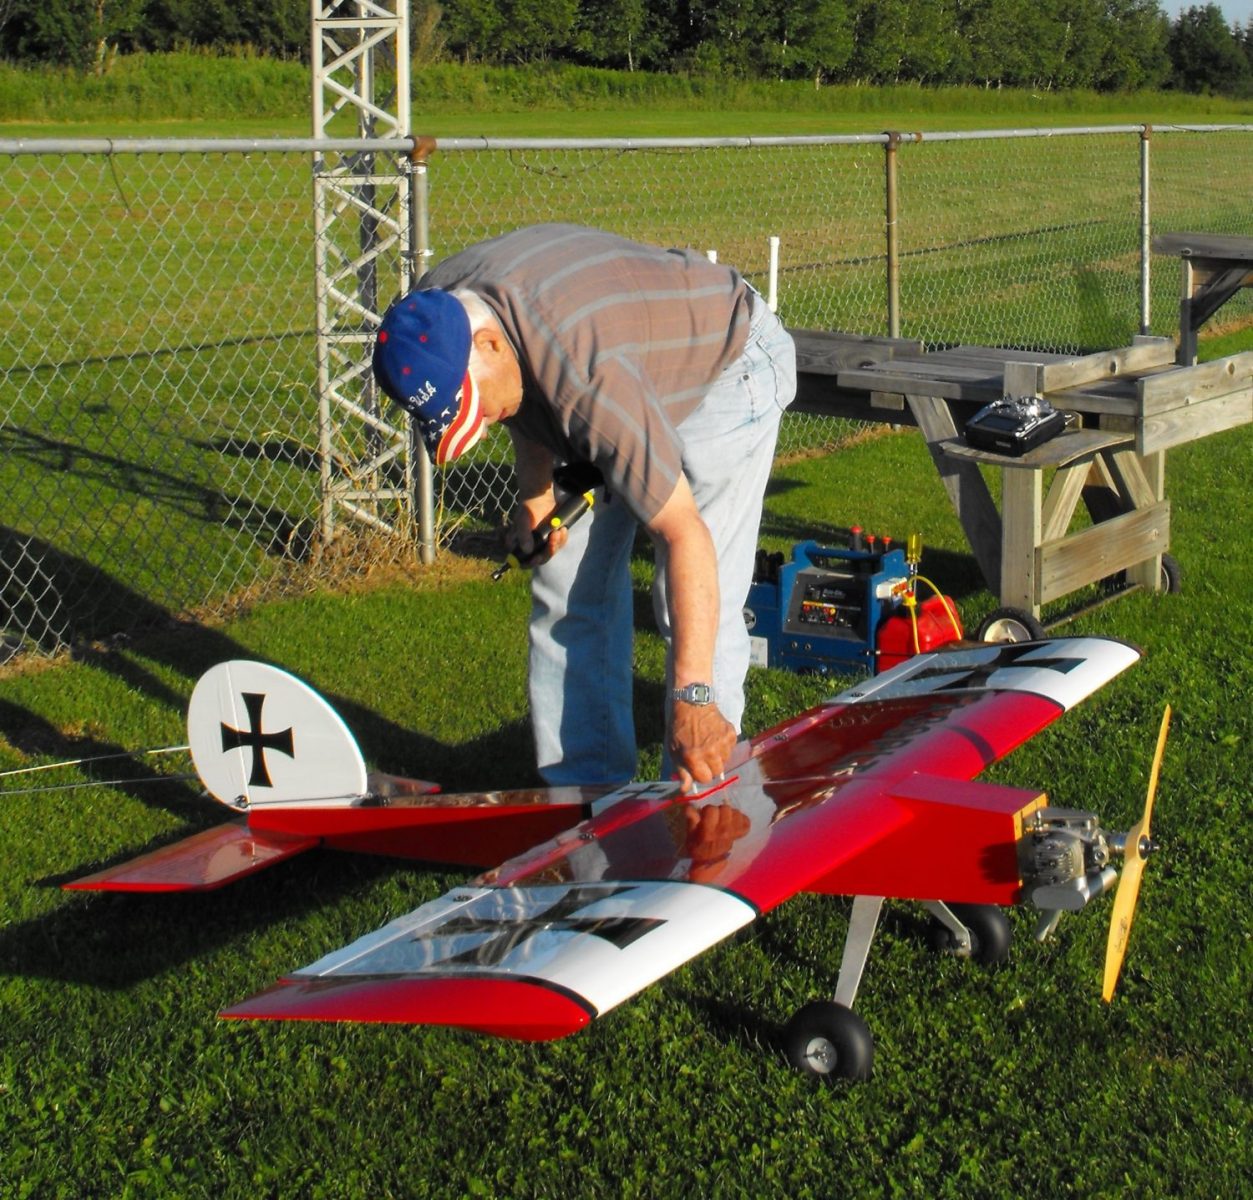 Mid State Aeroguidance Club member Burt Wells prepares to fly one of the gas-powered model planes that he has built.